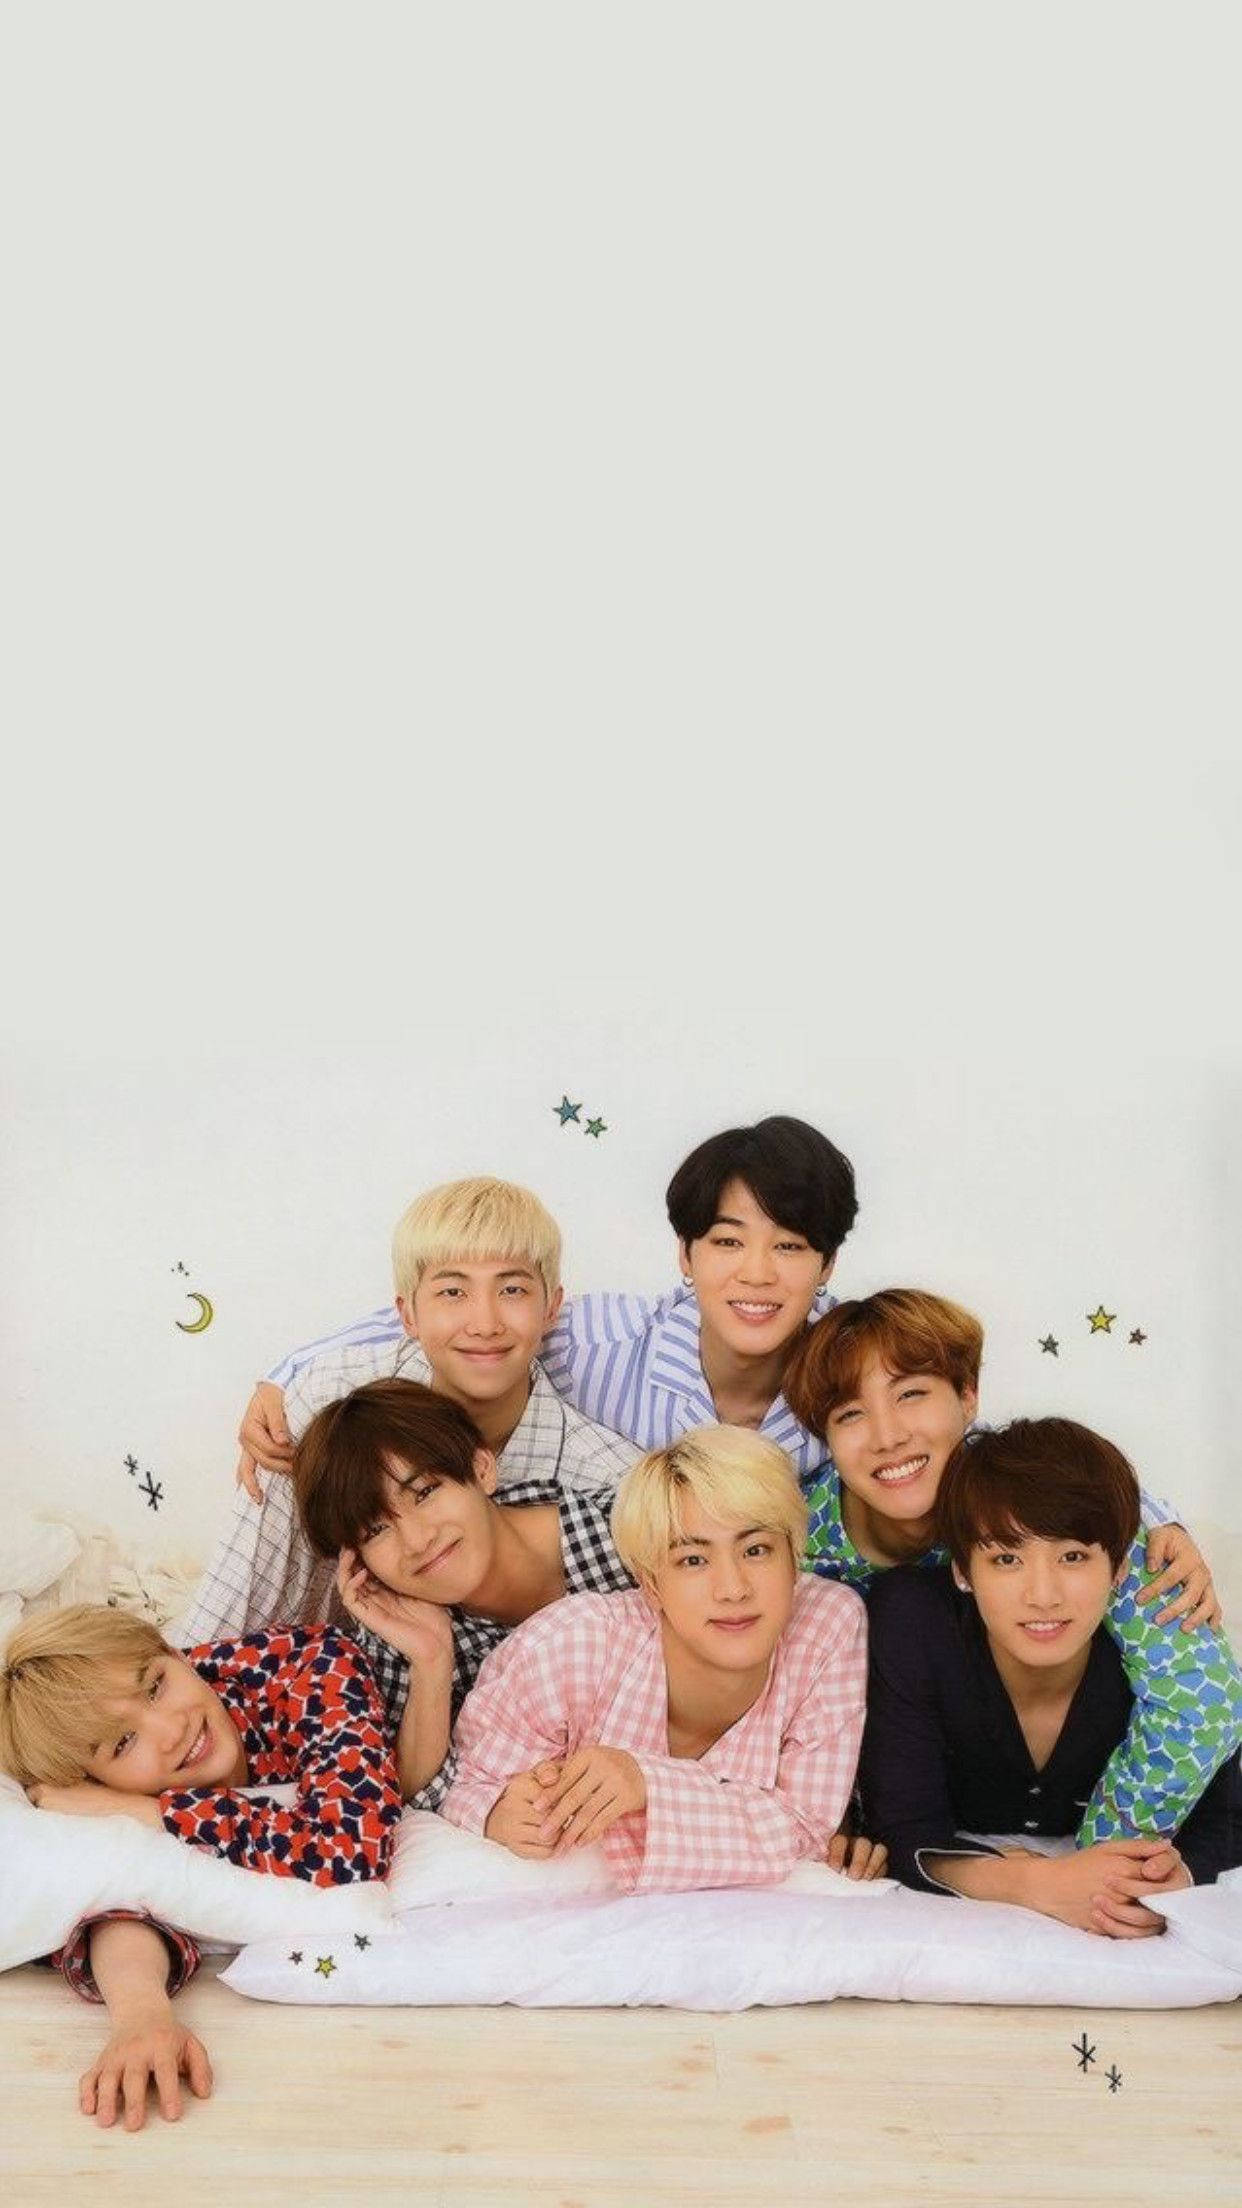 Free Bts Wallpaper Downloads, [1000+] Bts Wallpapers for FREE | Wallpapers .com